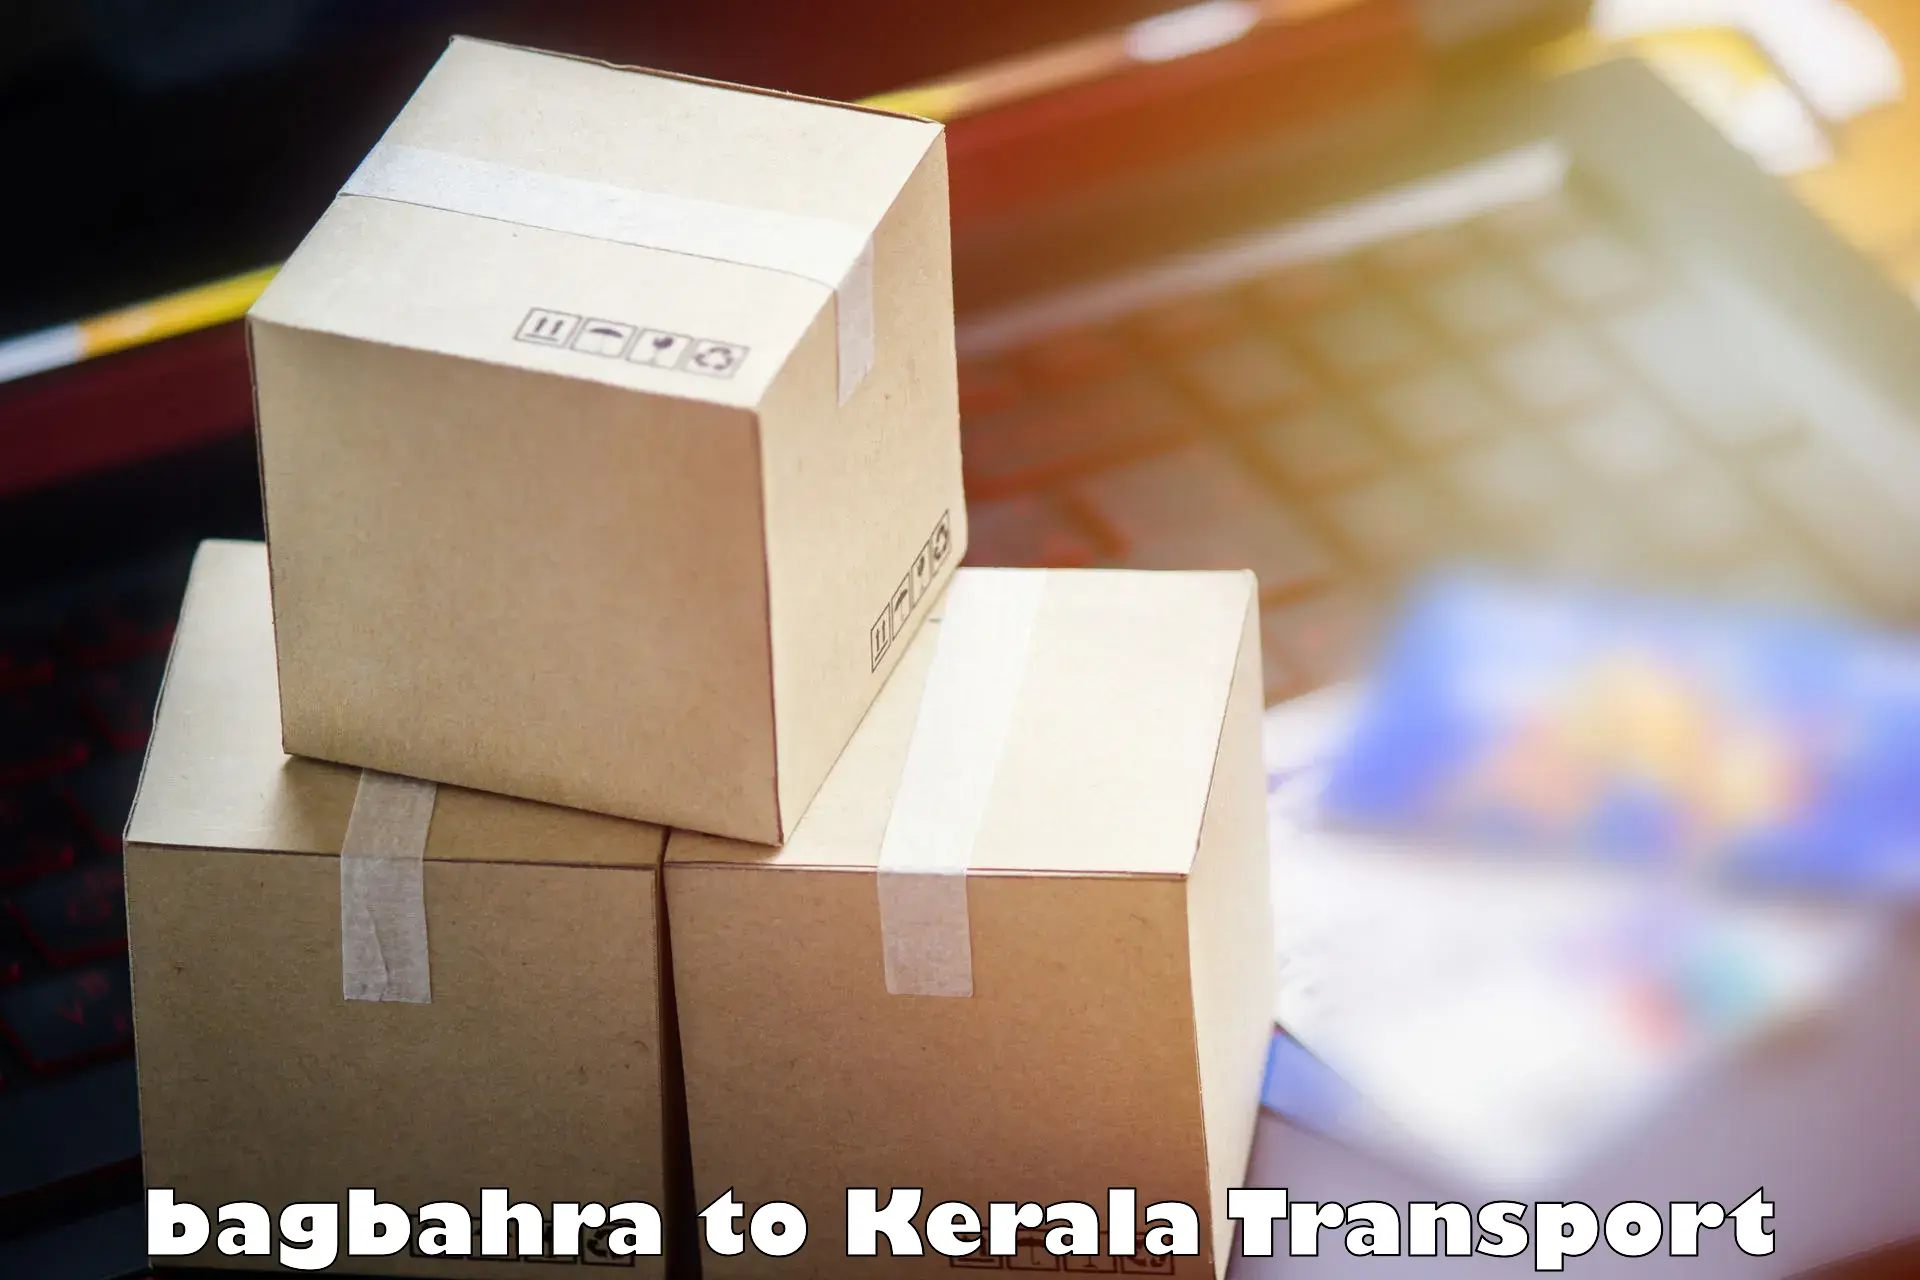 Pick up transport service bagbahra to Edappal